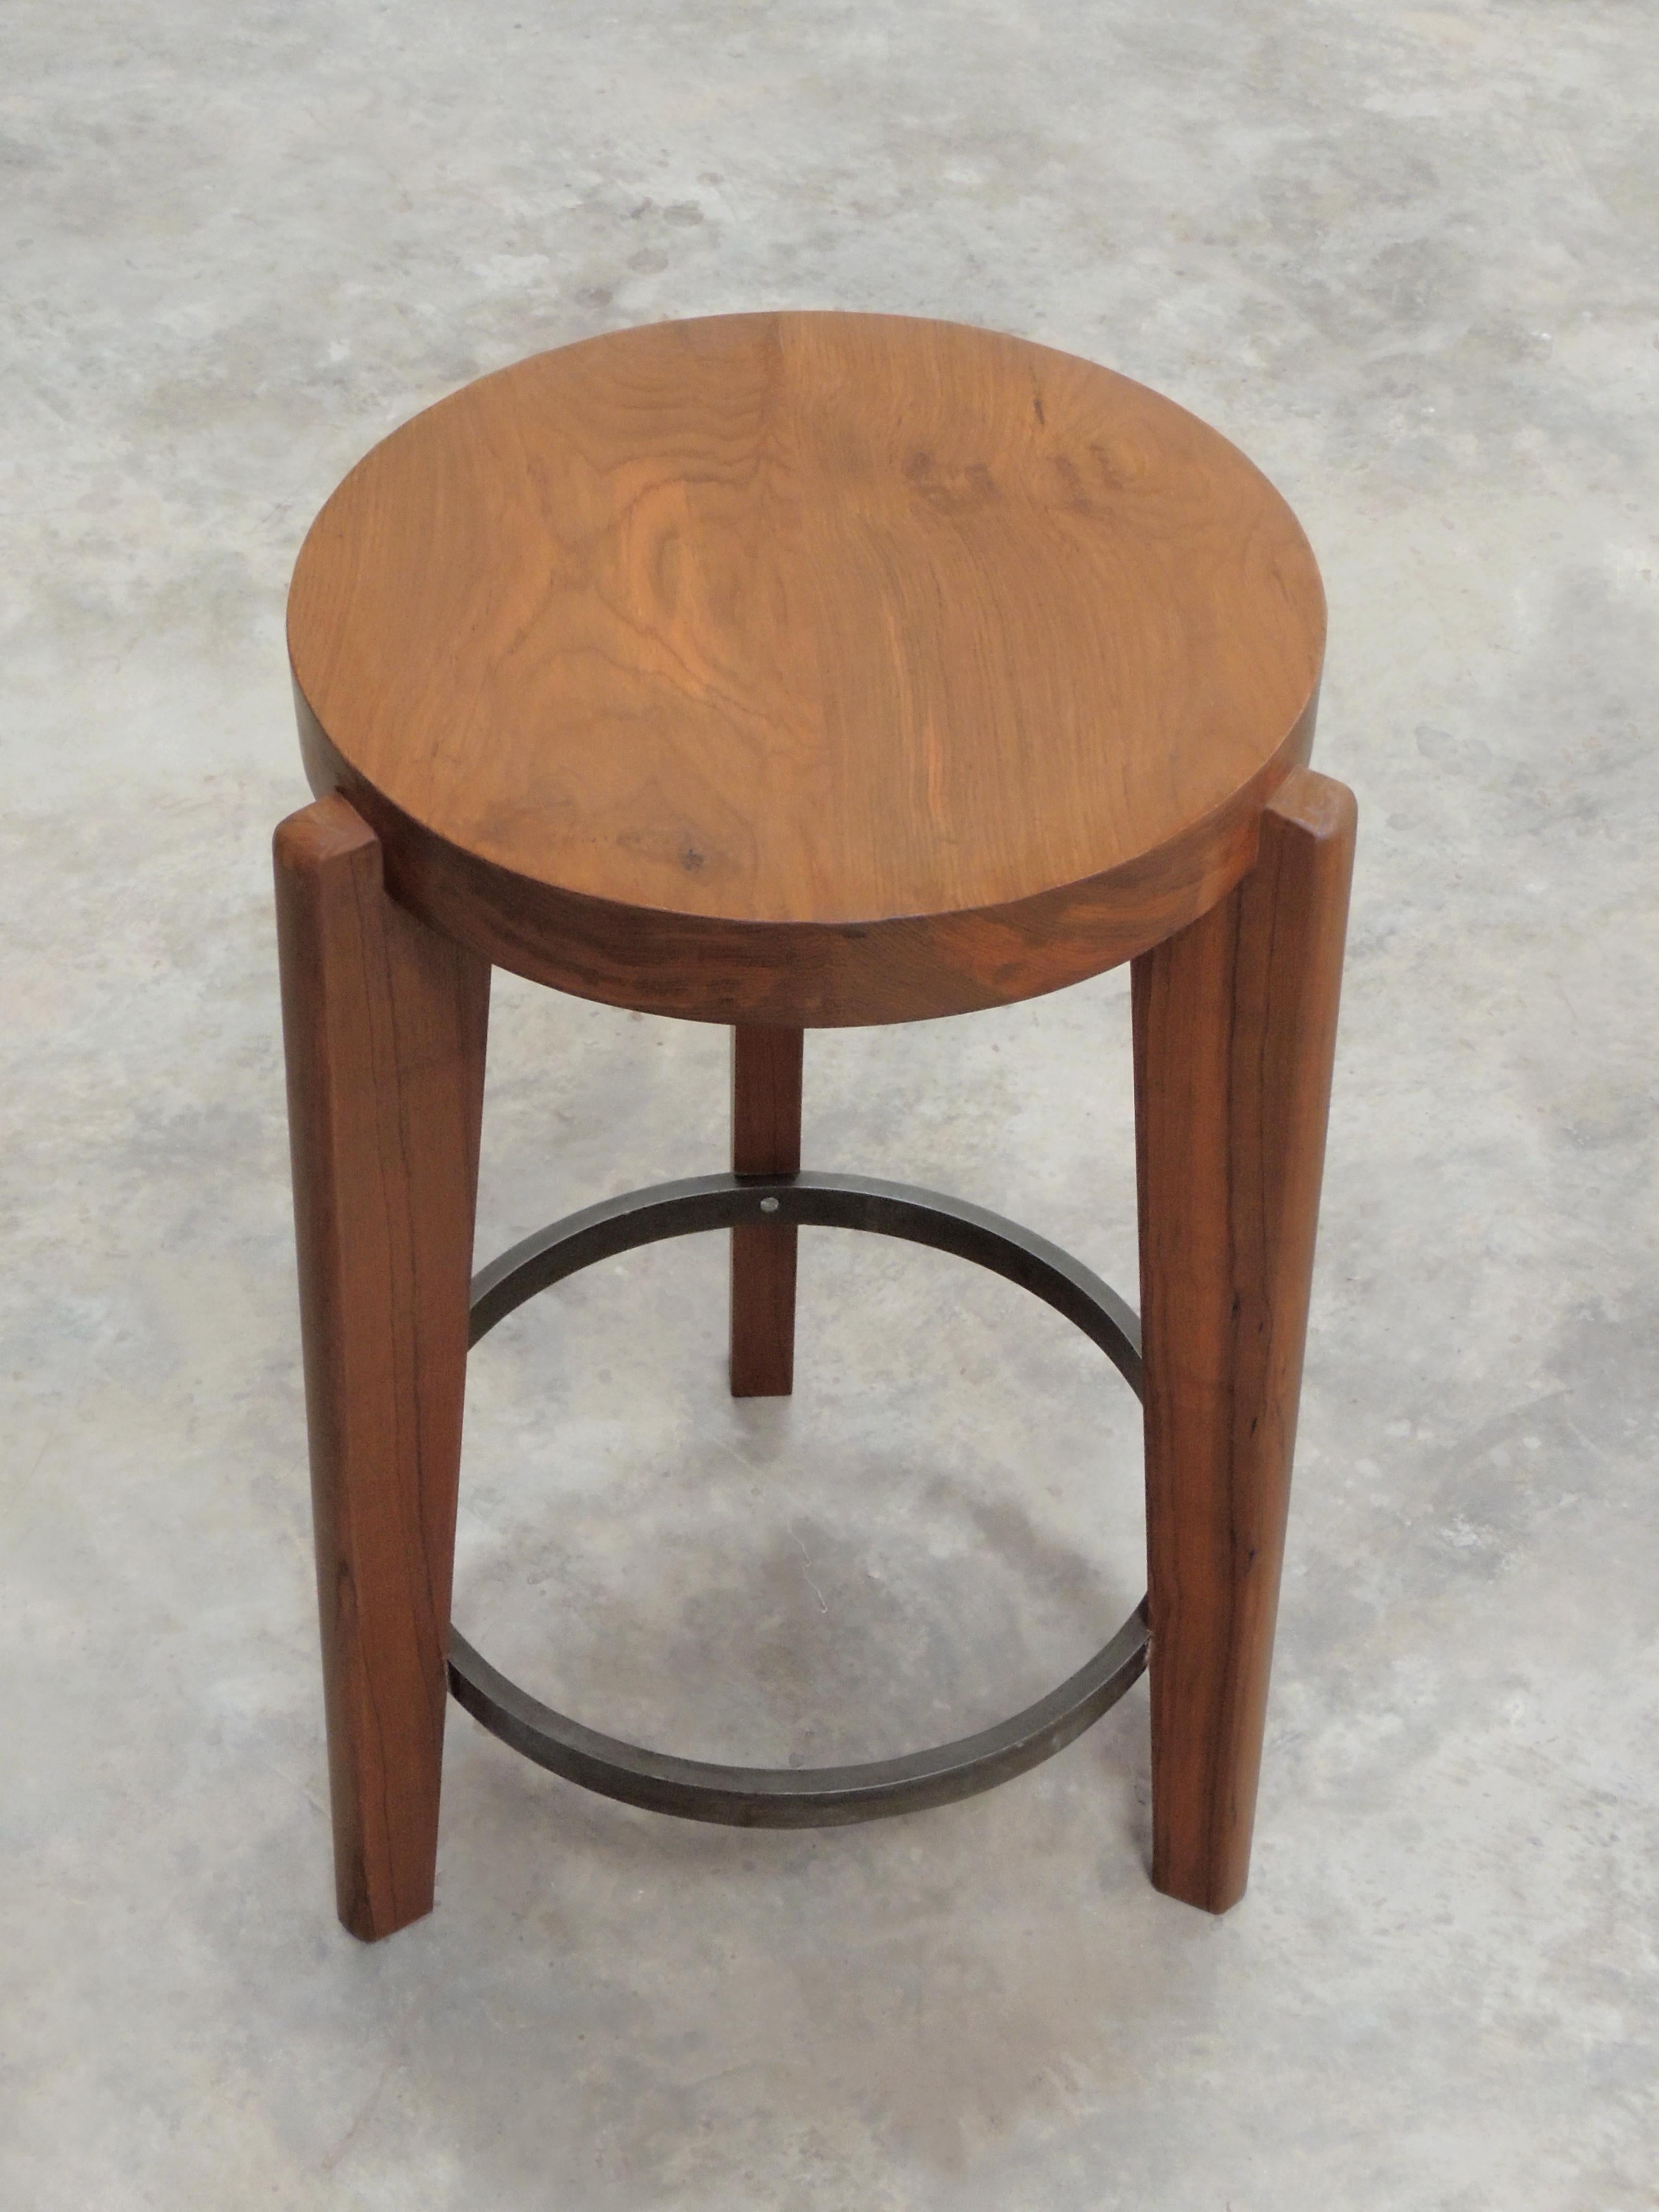 Pierre Jeanneret's Side Table/Stool, Hand-Sculpted Contemporary Reedition (Asiatisch)